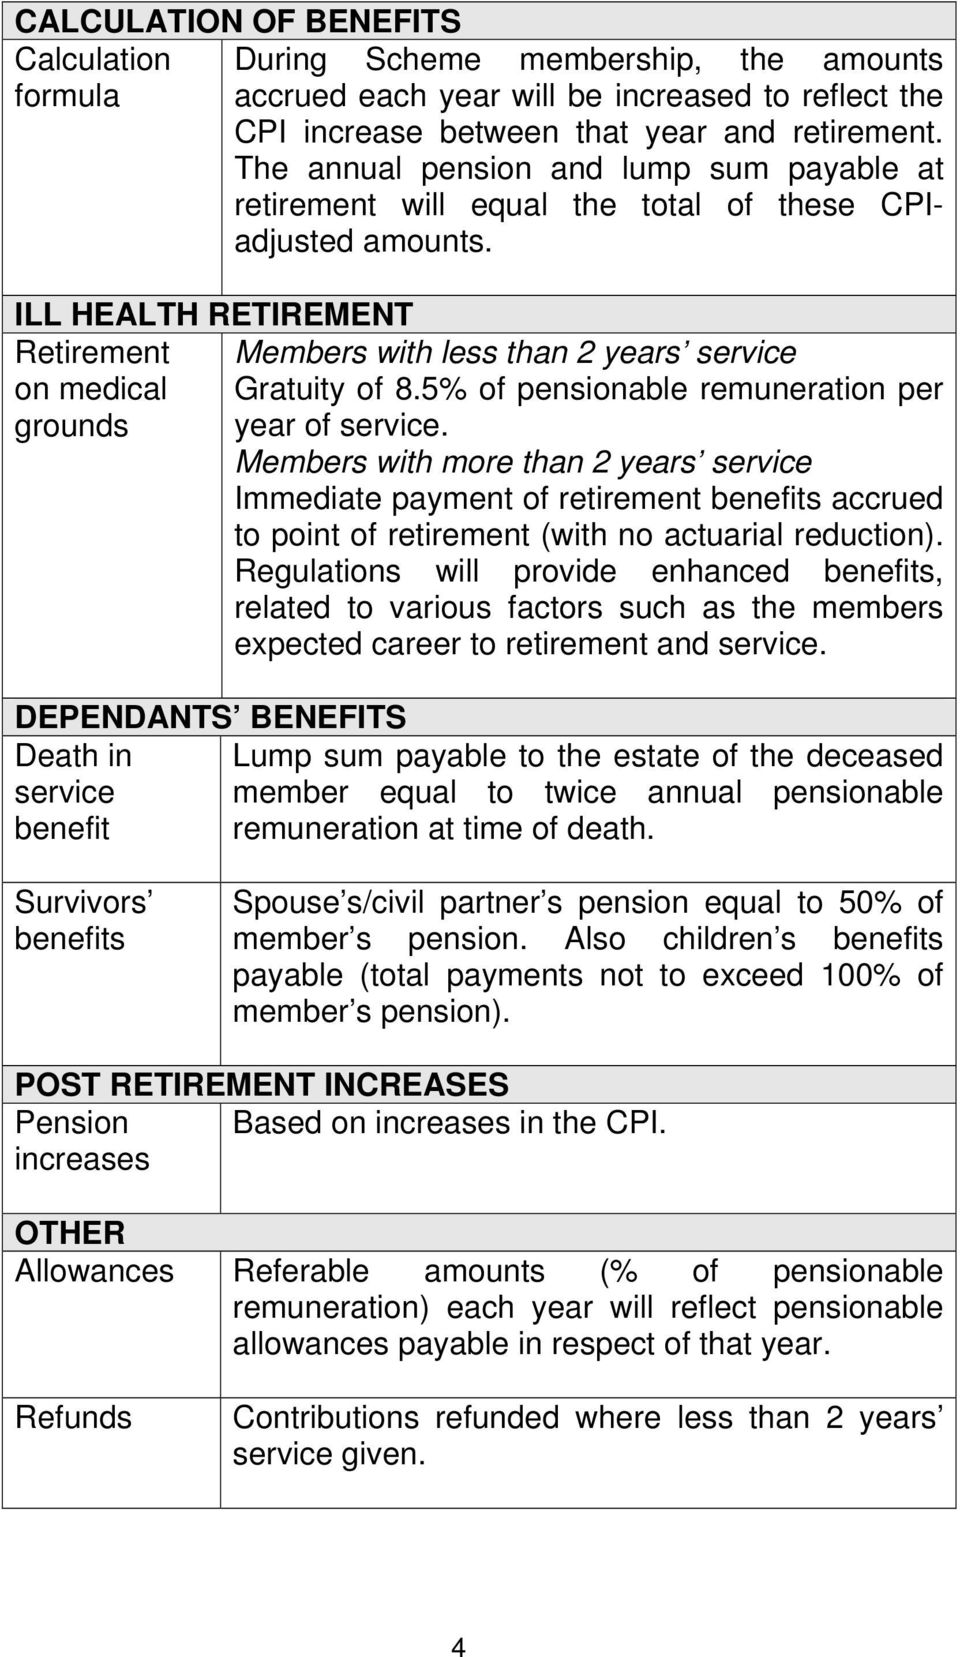 ILL HEALTH RETIREMENT Retirement n medical grunds Members with less than 2 years service Gratuity f 8.5% f pensinable remuneratin per year f service.